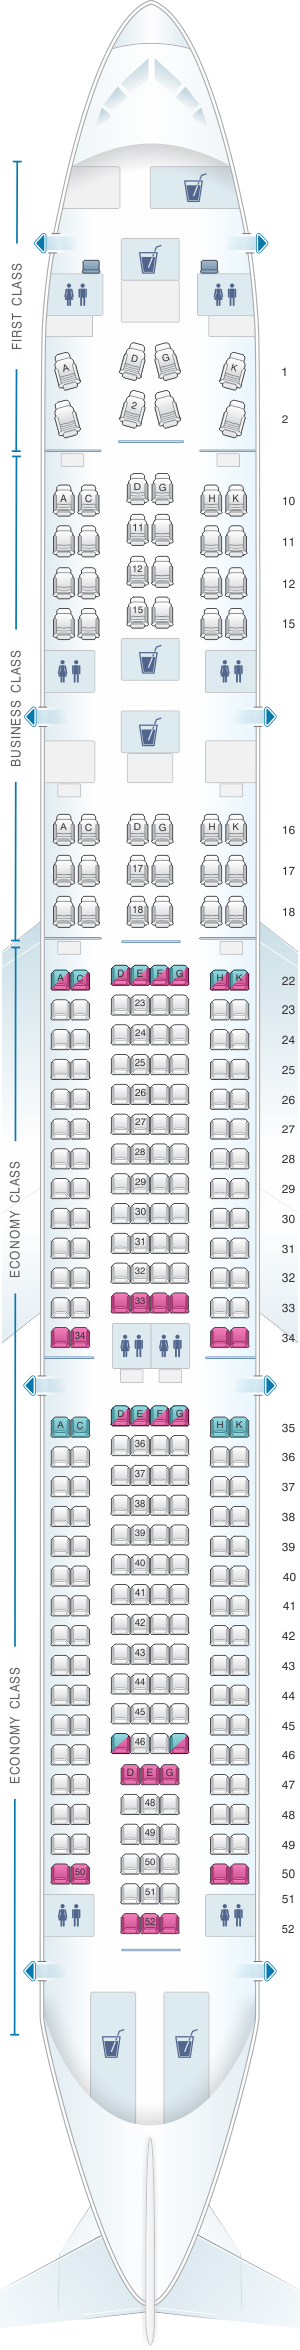 Seat Map Cathay Pacific Airways Dragon Airbus A330 300 A33r Seatmaestro